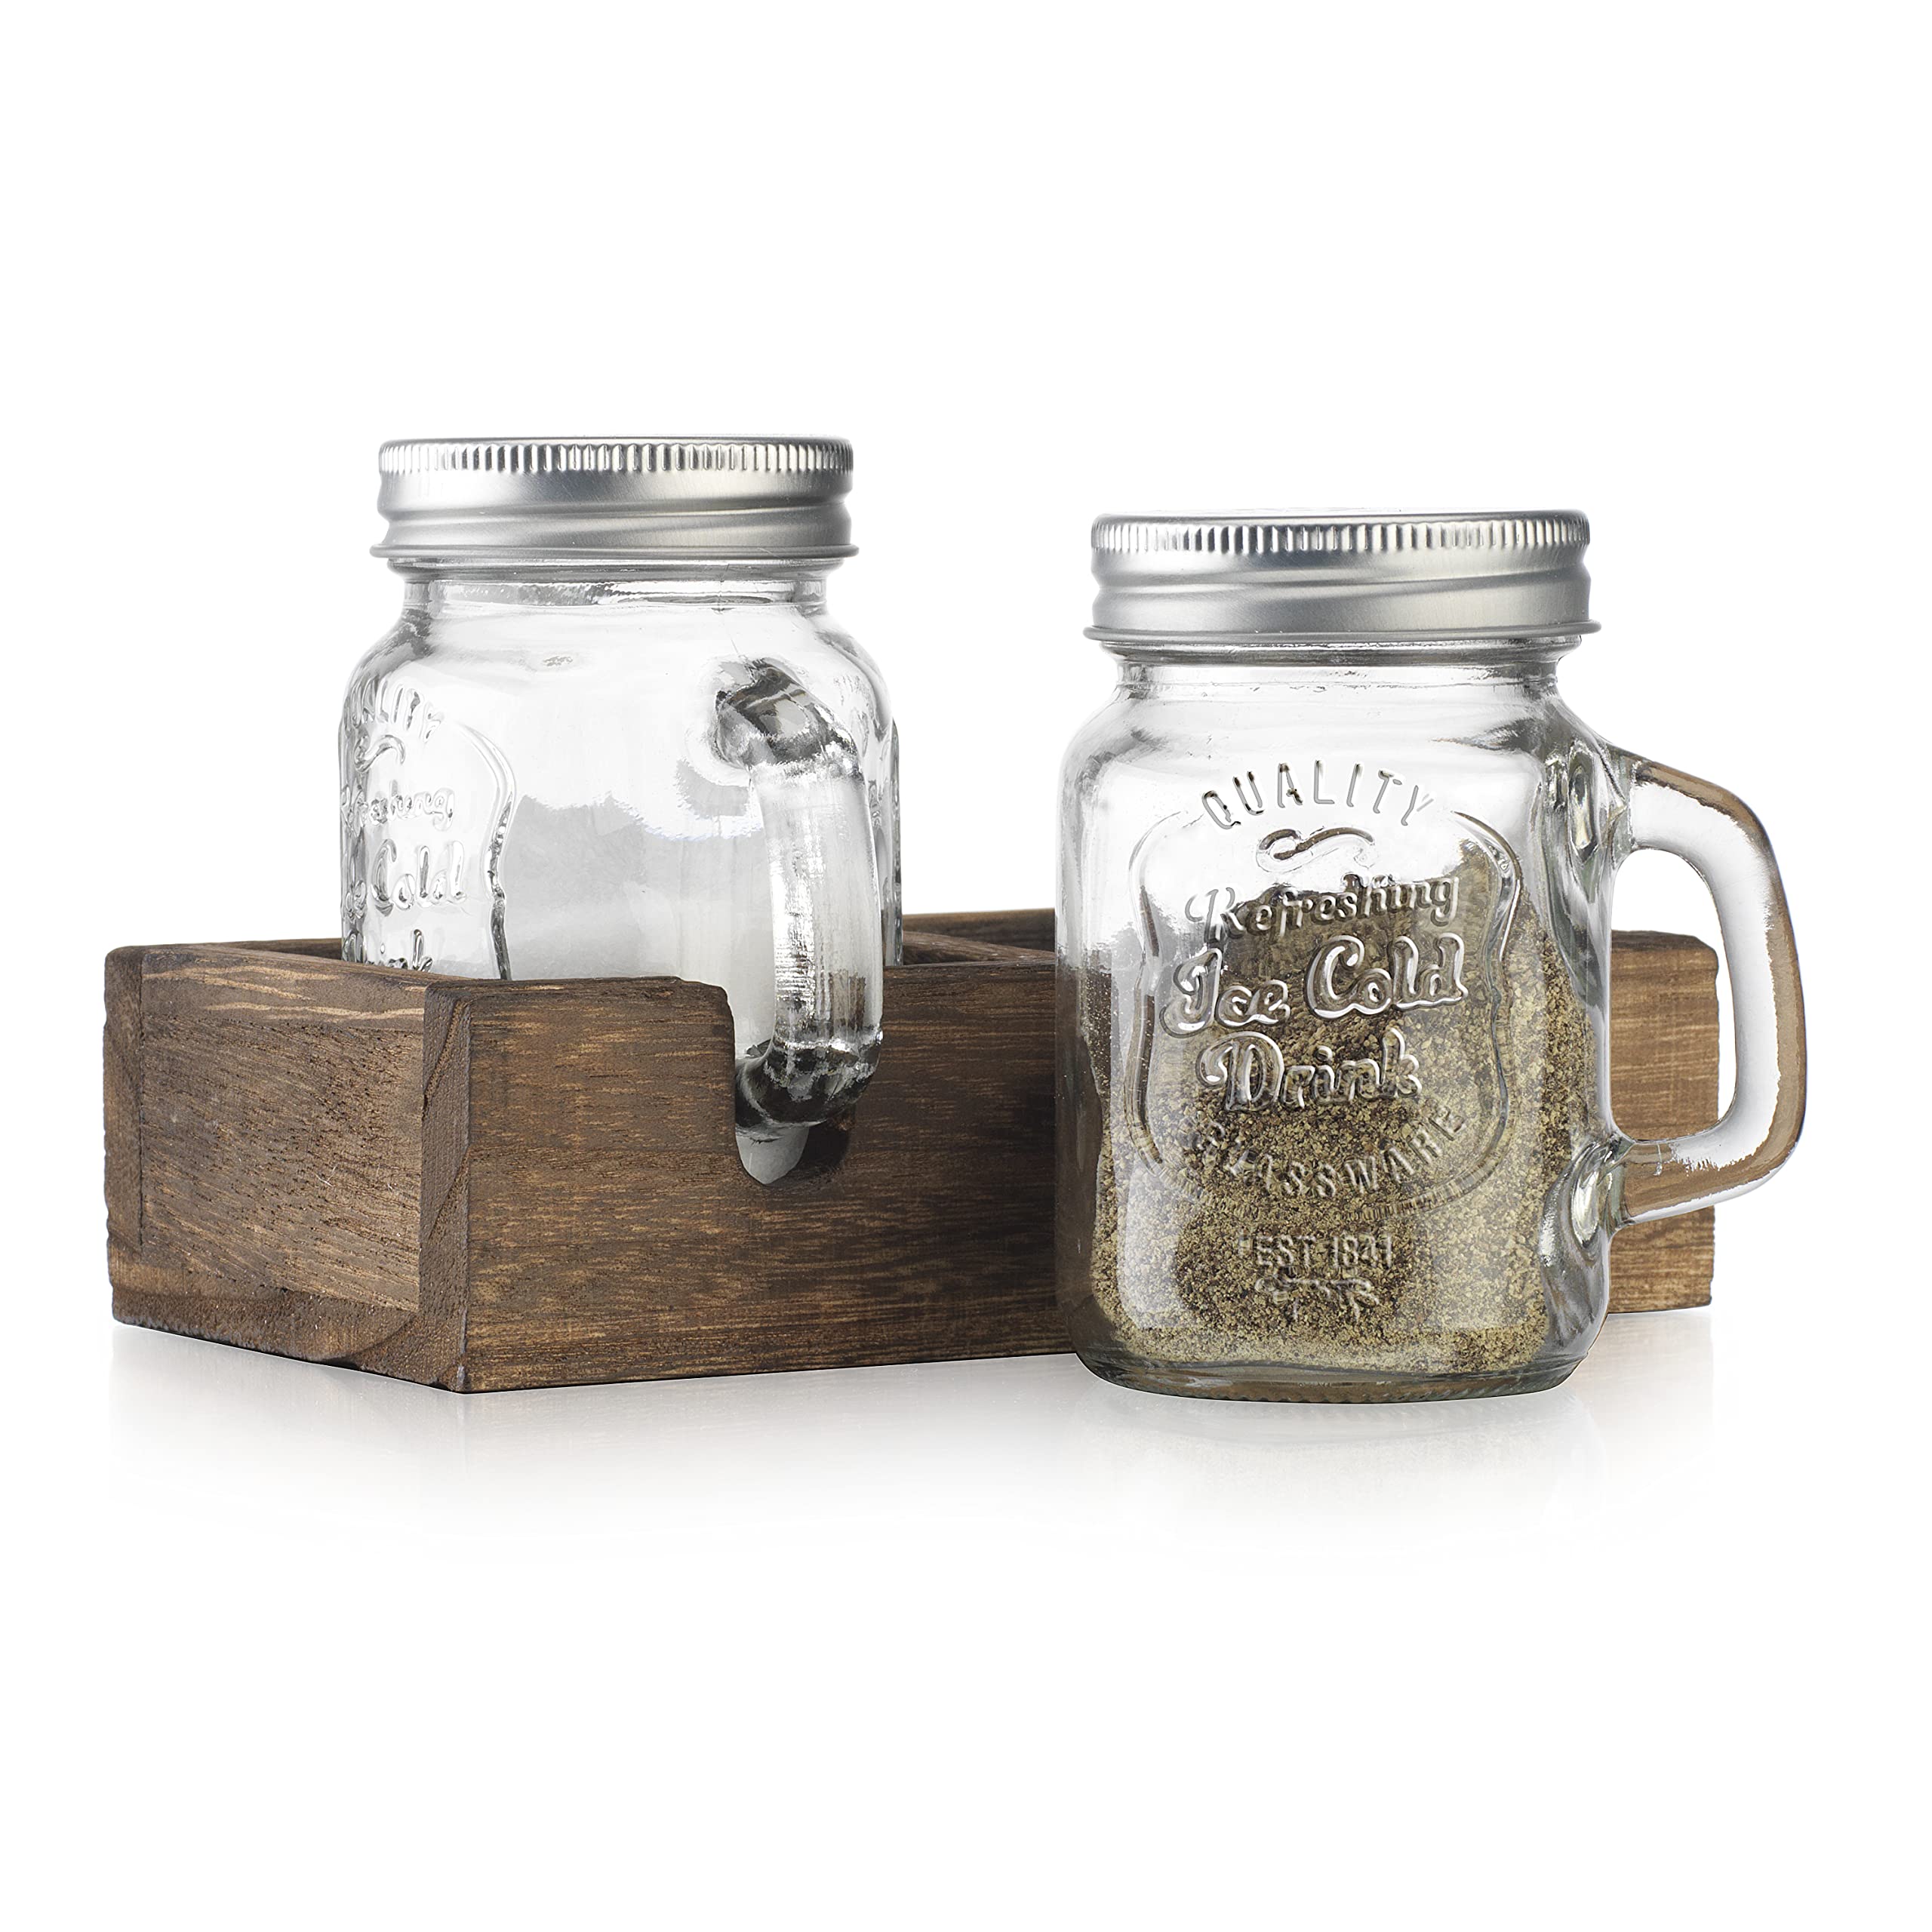 MosJos Mason Jar Salt and Pepper Shakers - Vintage Glass Condiment Dispenser Set with Wooden Holder Caddy - Farmhouse Kitchen Decor, Easy Refill 5-ounce Capacity with Stainless Steel Lids  - Like New